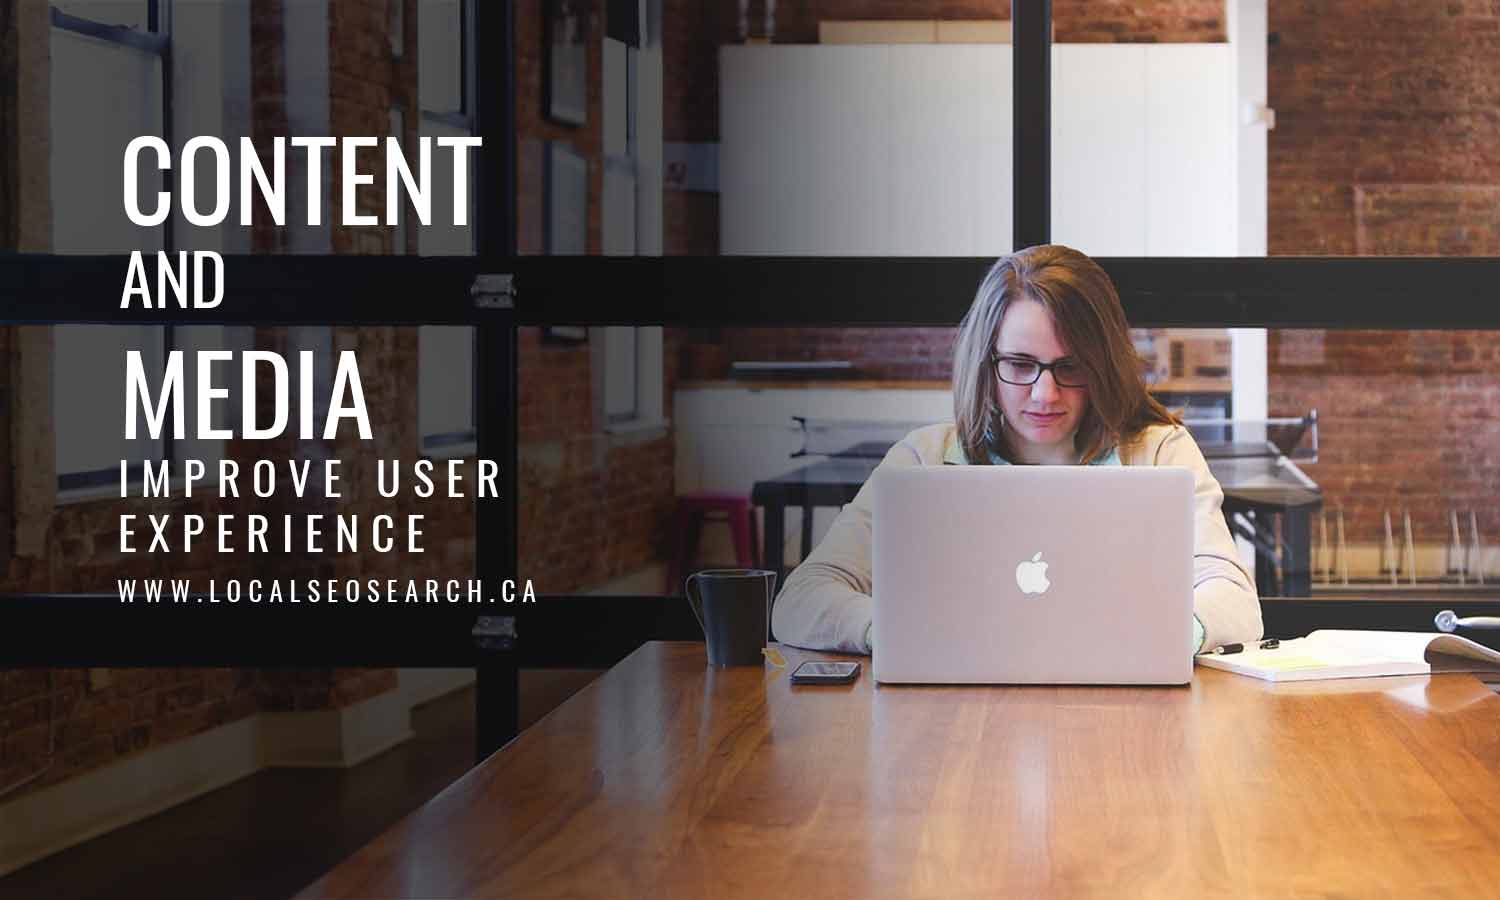 Content-and-media-improve-user-experience